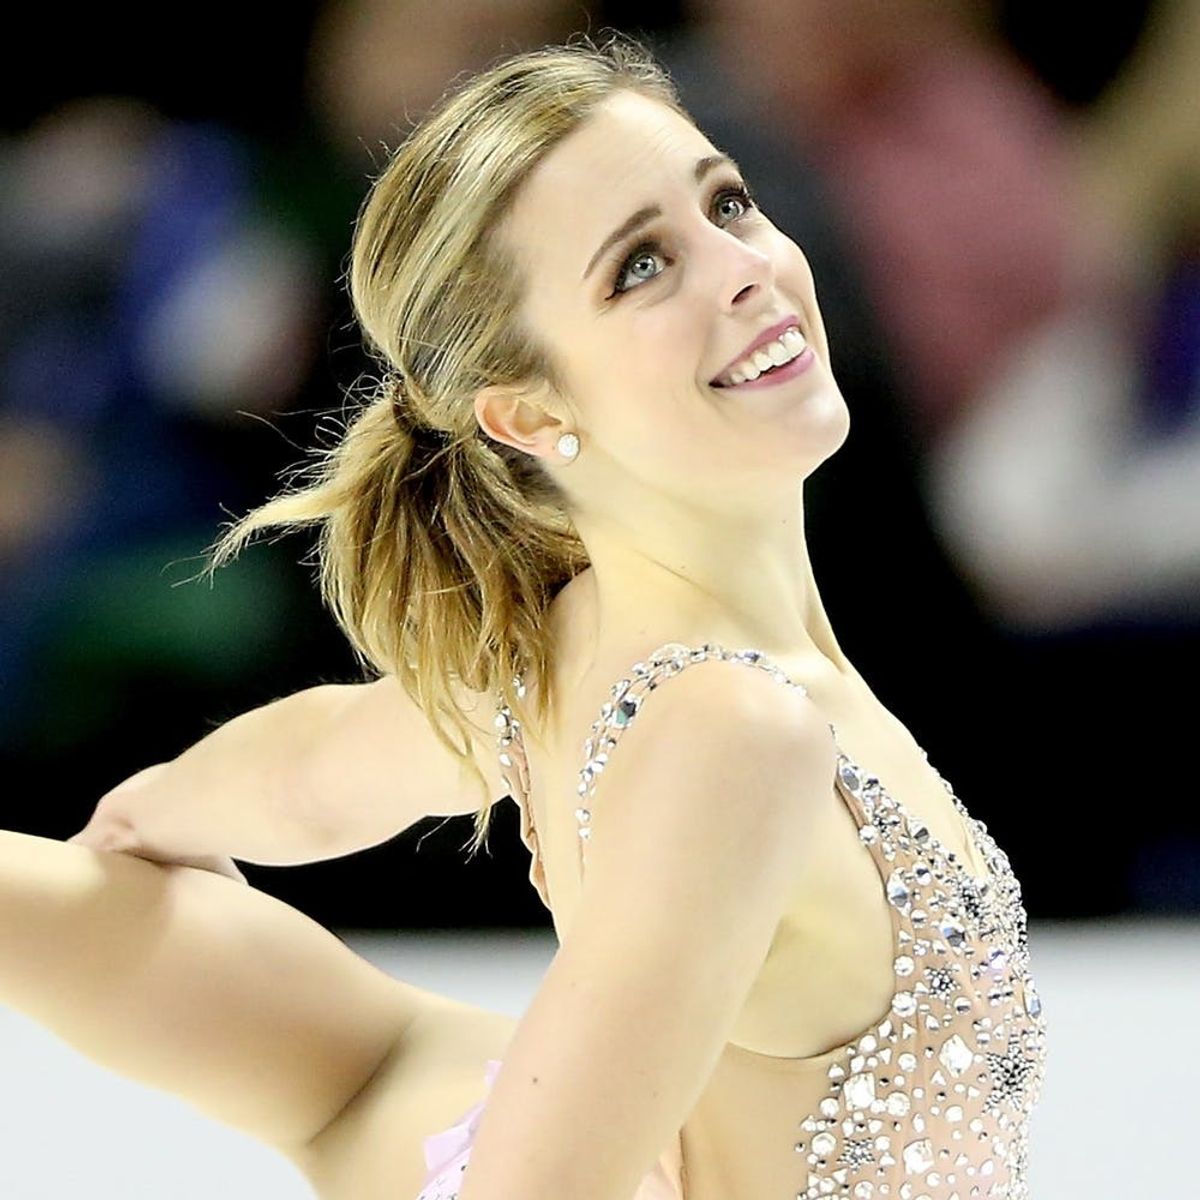 Ashley Wagner Doesn’t Regret Her ‘Furious’ Reaction to Not Making the Olympic Team